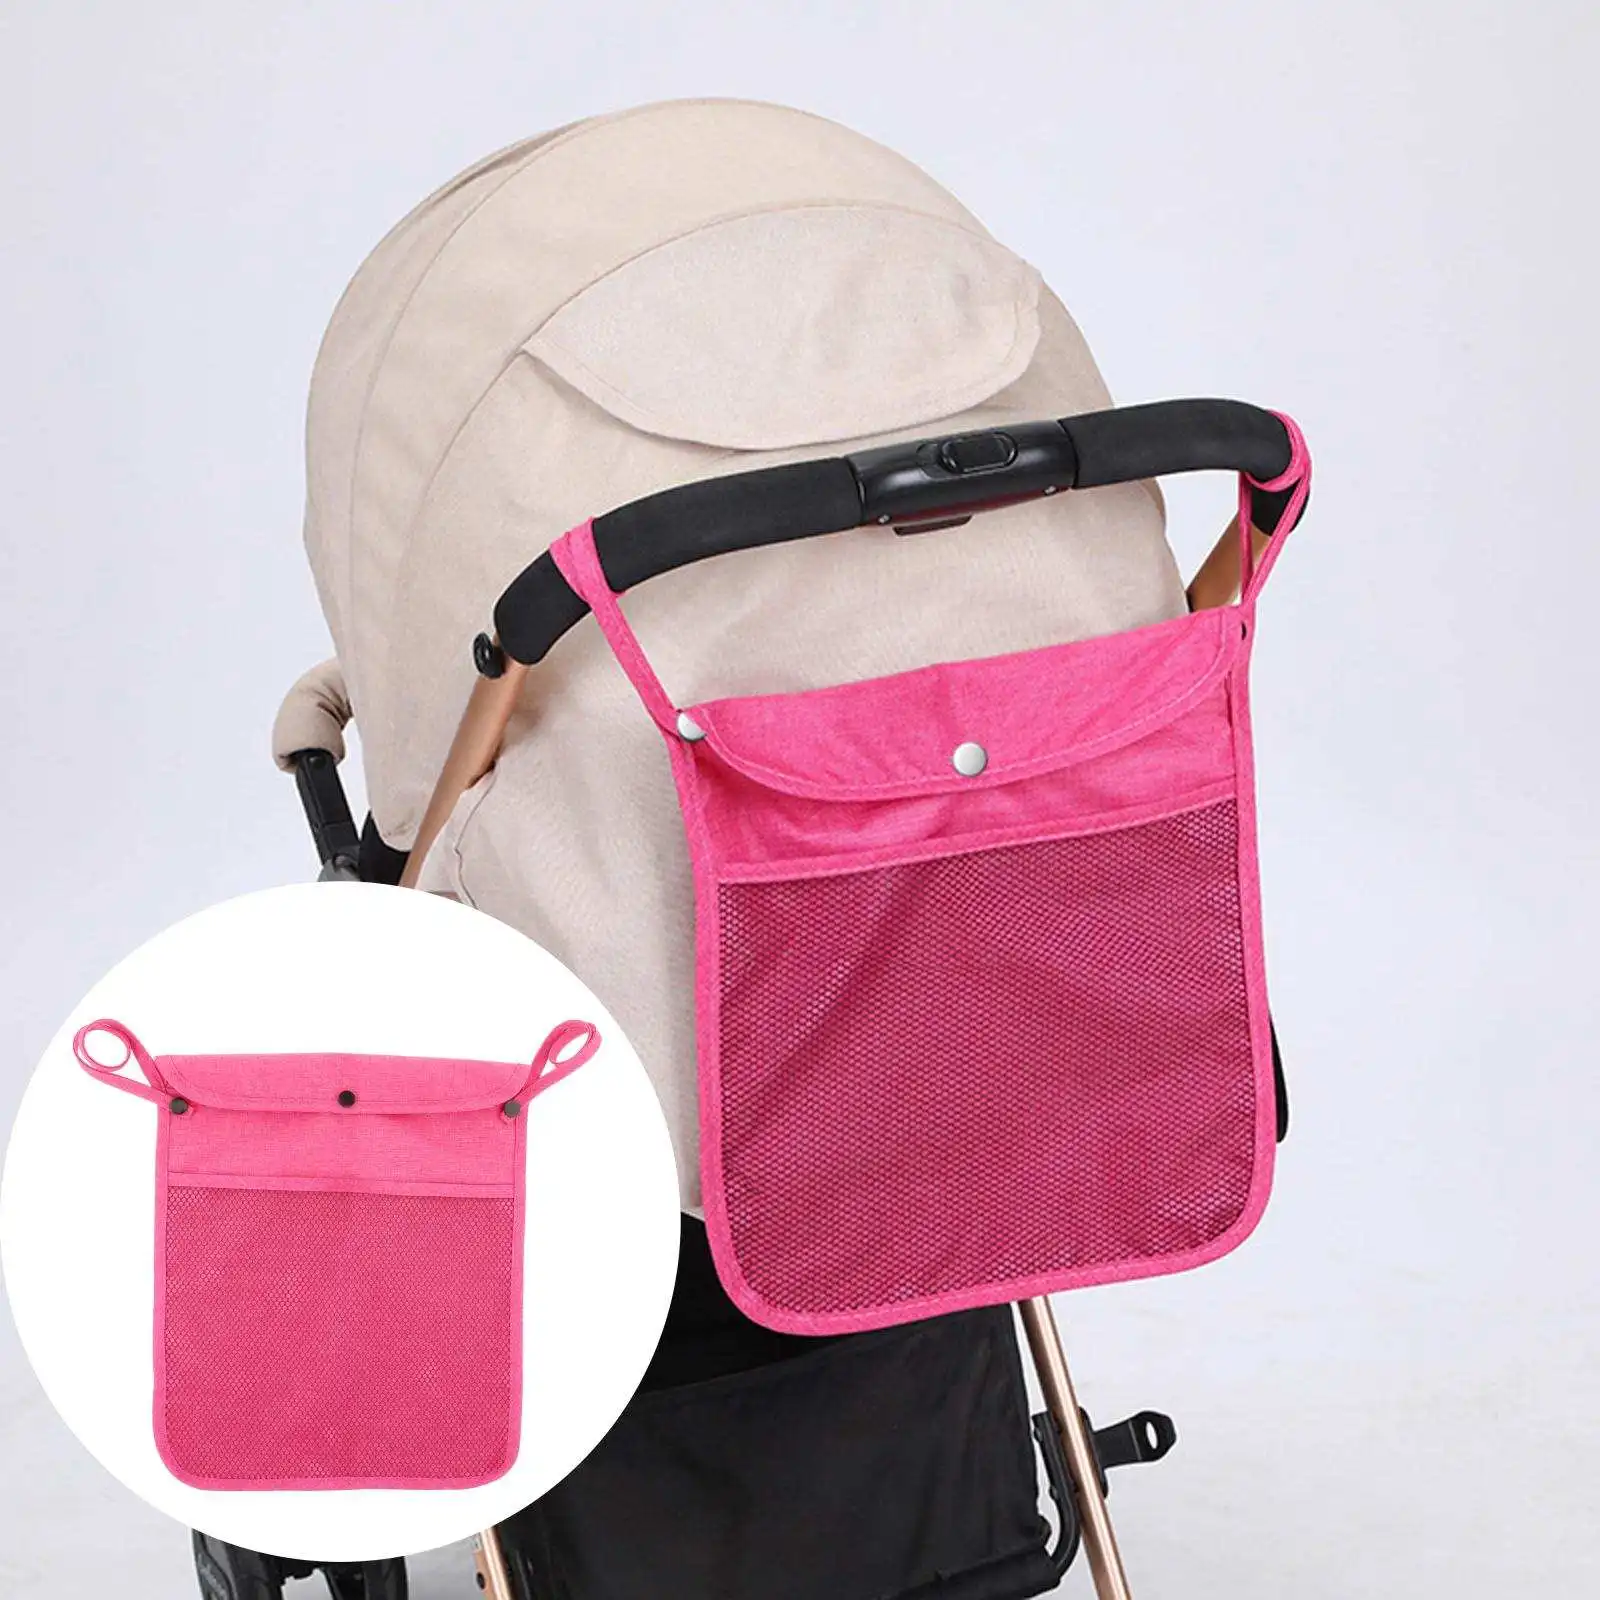 Baby Stroller Organizer Bottle Holder Small Diaper Bags Maternity Nappy Bag Pouch Accessories For Portable Baby Carriage